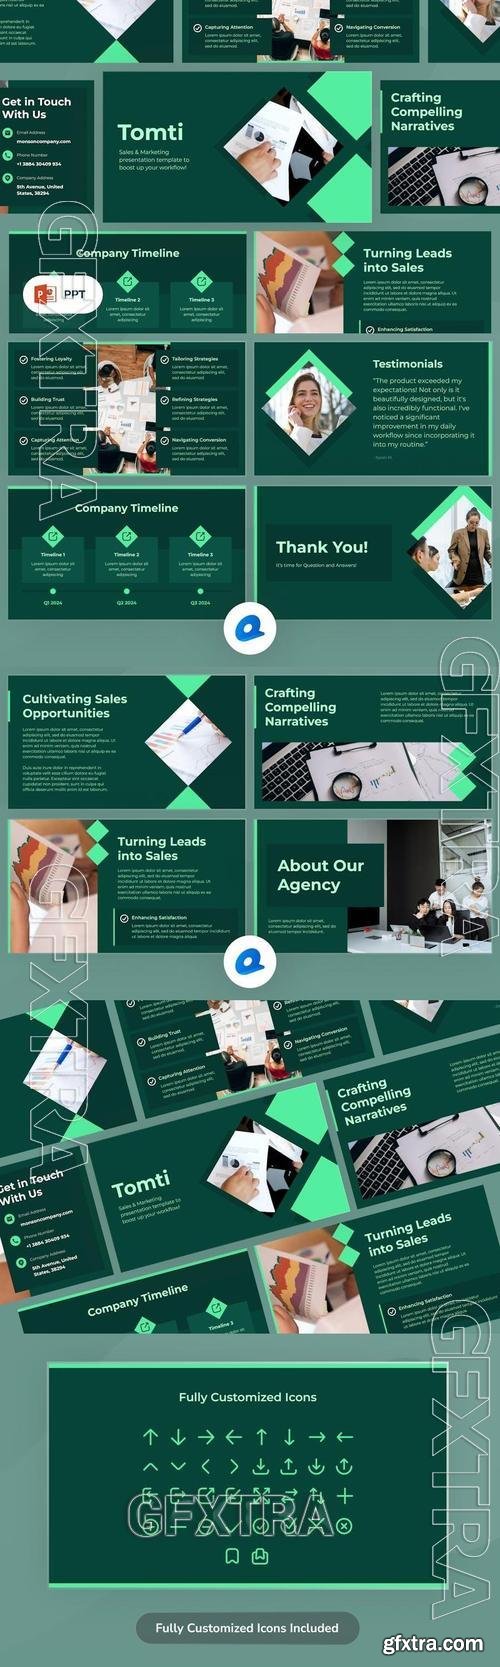 Tomti - Sales & Marketing Power Point Template FHPVUKL